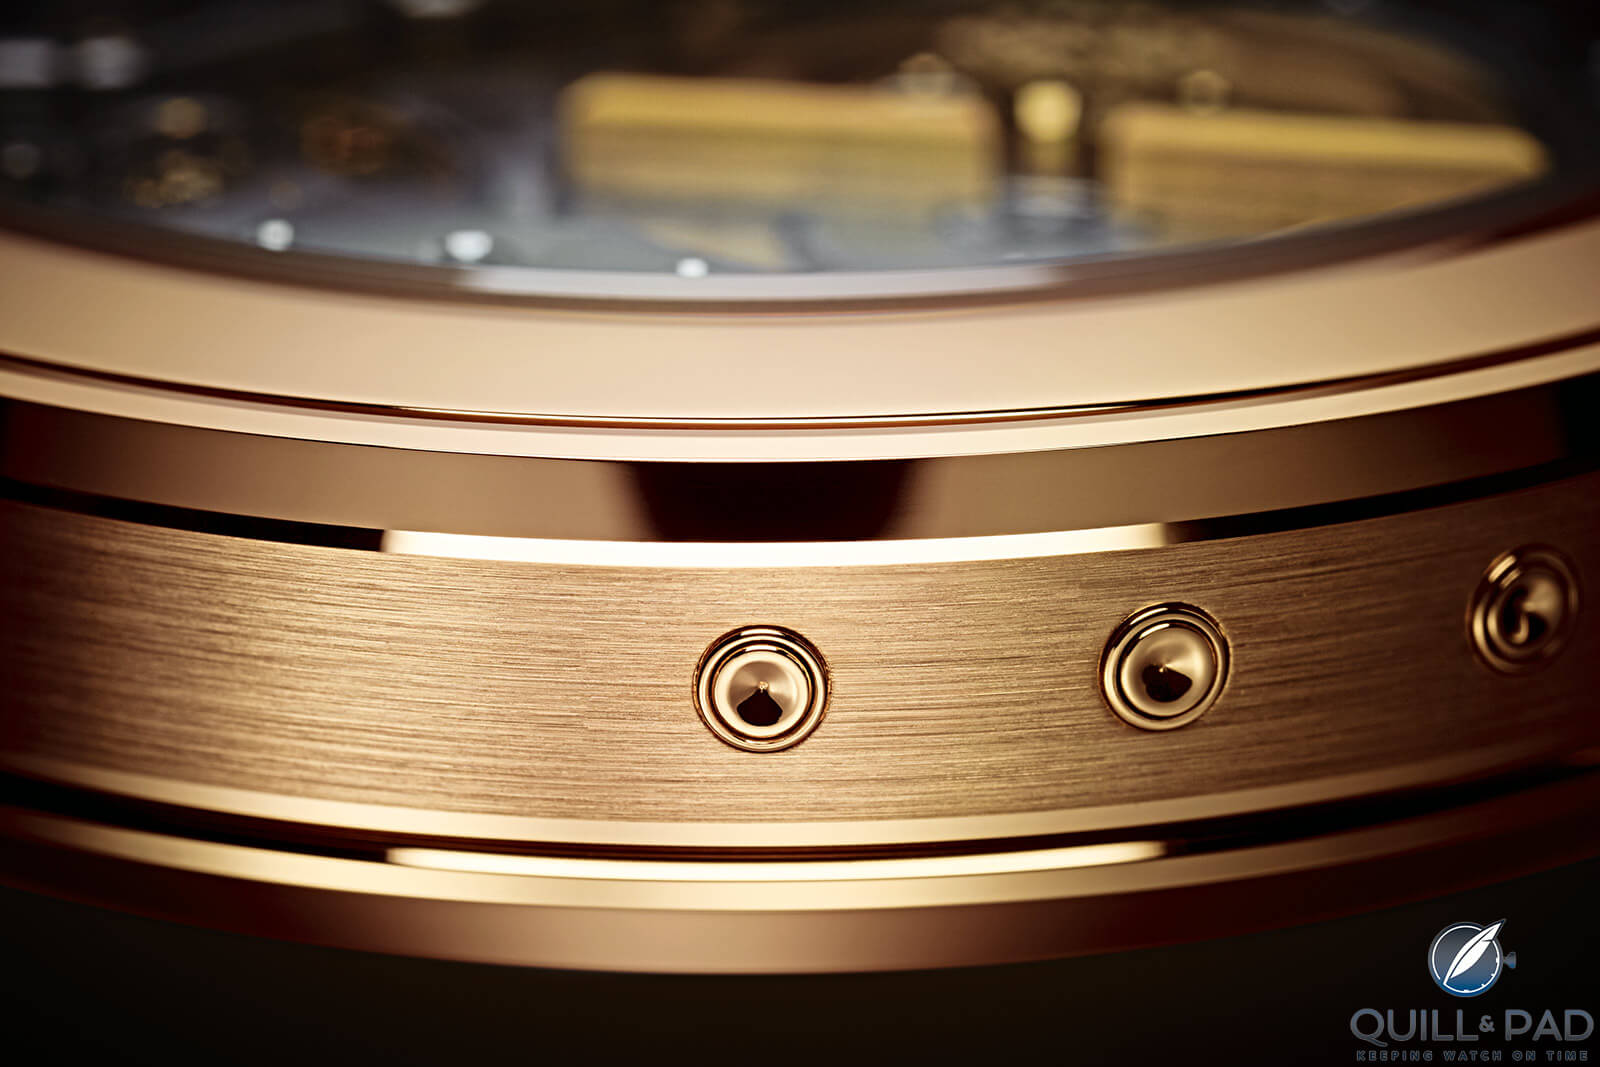 Calendar corrector pushers inset into the caseband of the Patek Philippe Reference 5235/50R-001